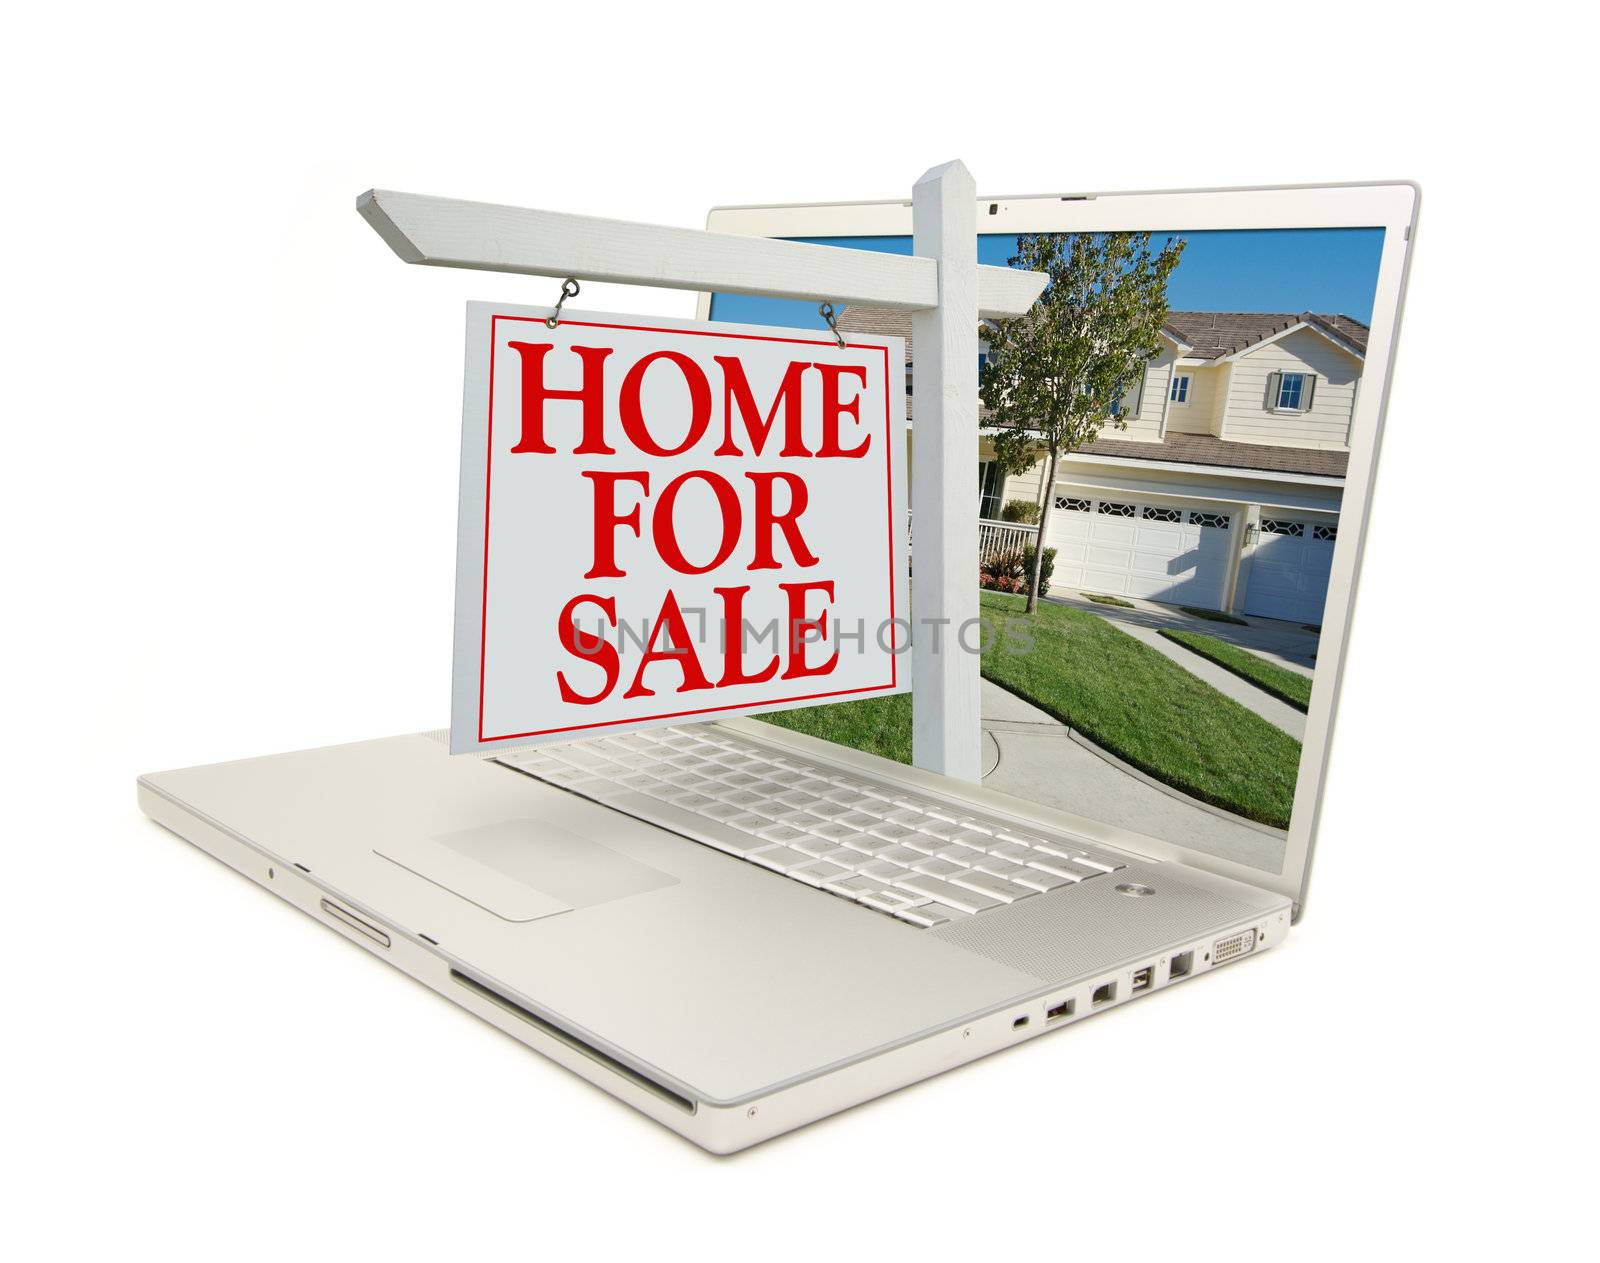 Home for Sale Sign & New Home on Laptop isolated on a white Background.